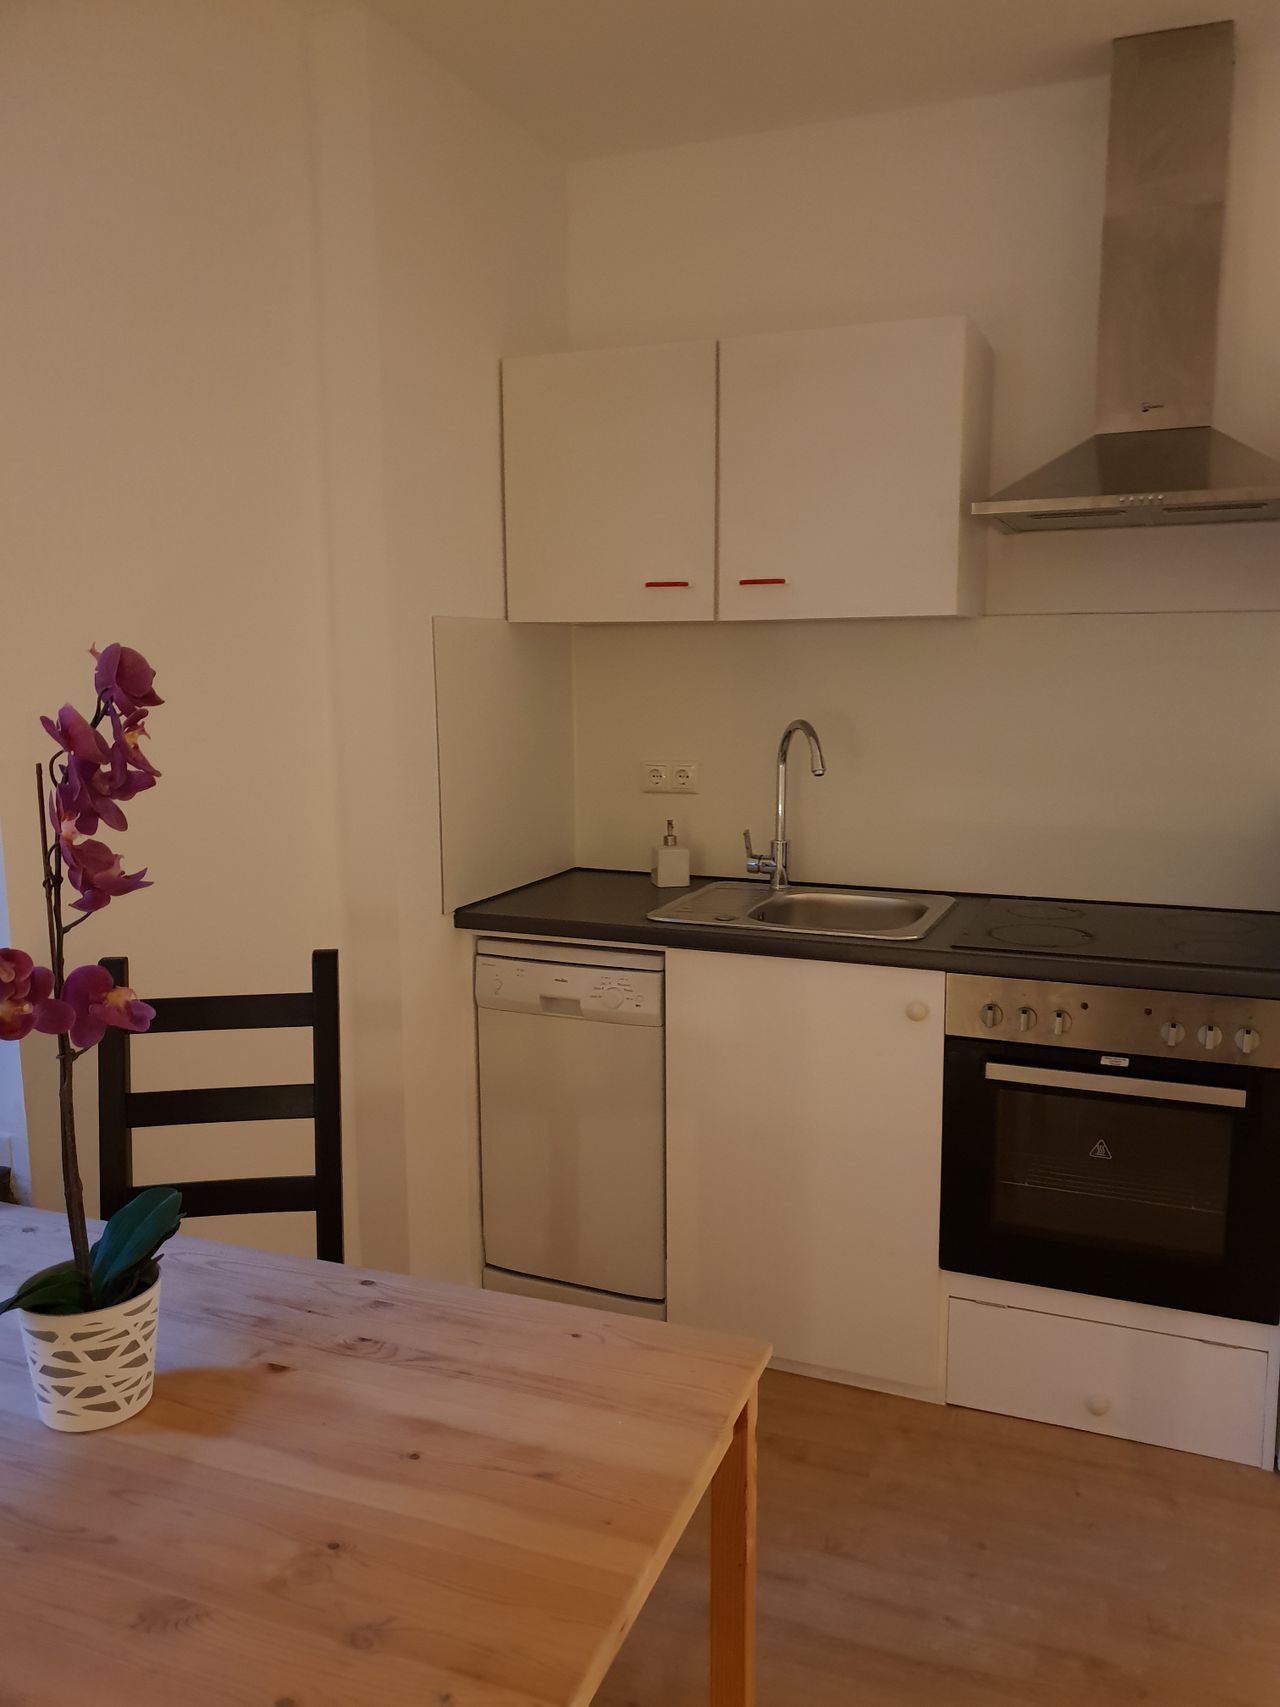 Renovated 1,5 room apartment close to the main station